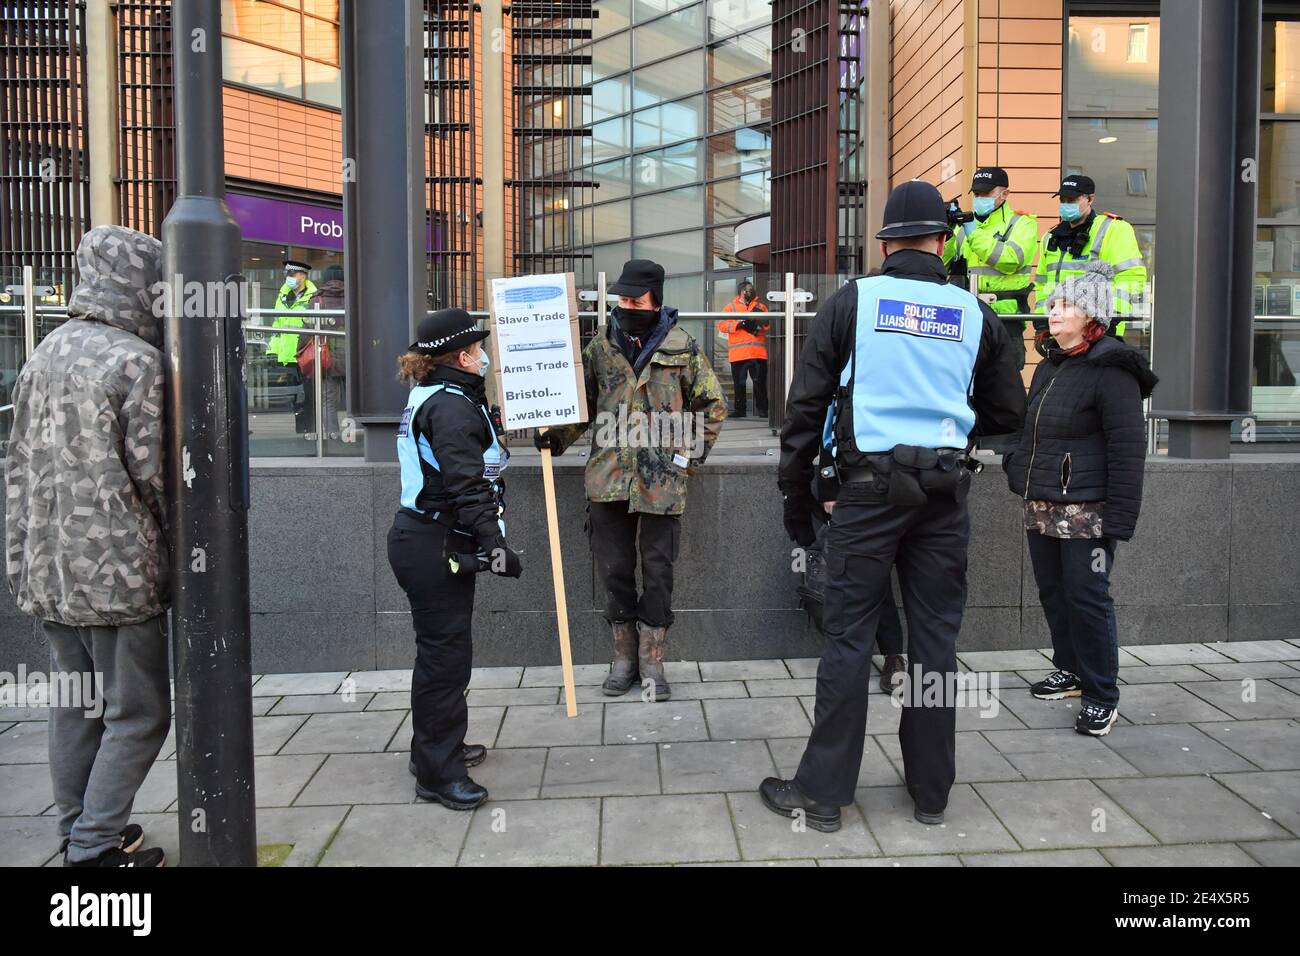 Protesters outside Bristol Magistrates' Court, where Rhian Graham, Milo Ponsford, Jake Skuse and Sage Willoughby are due to appear charged with criminal damage over the toppling of the Edward Colston statue in Bristol during the Black Lives Matter protests in June last year. Picture date: Monday January 25, 2021. Stock Photo